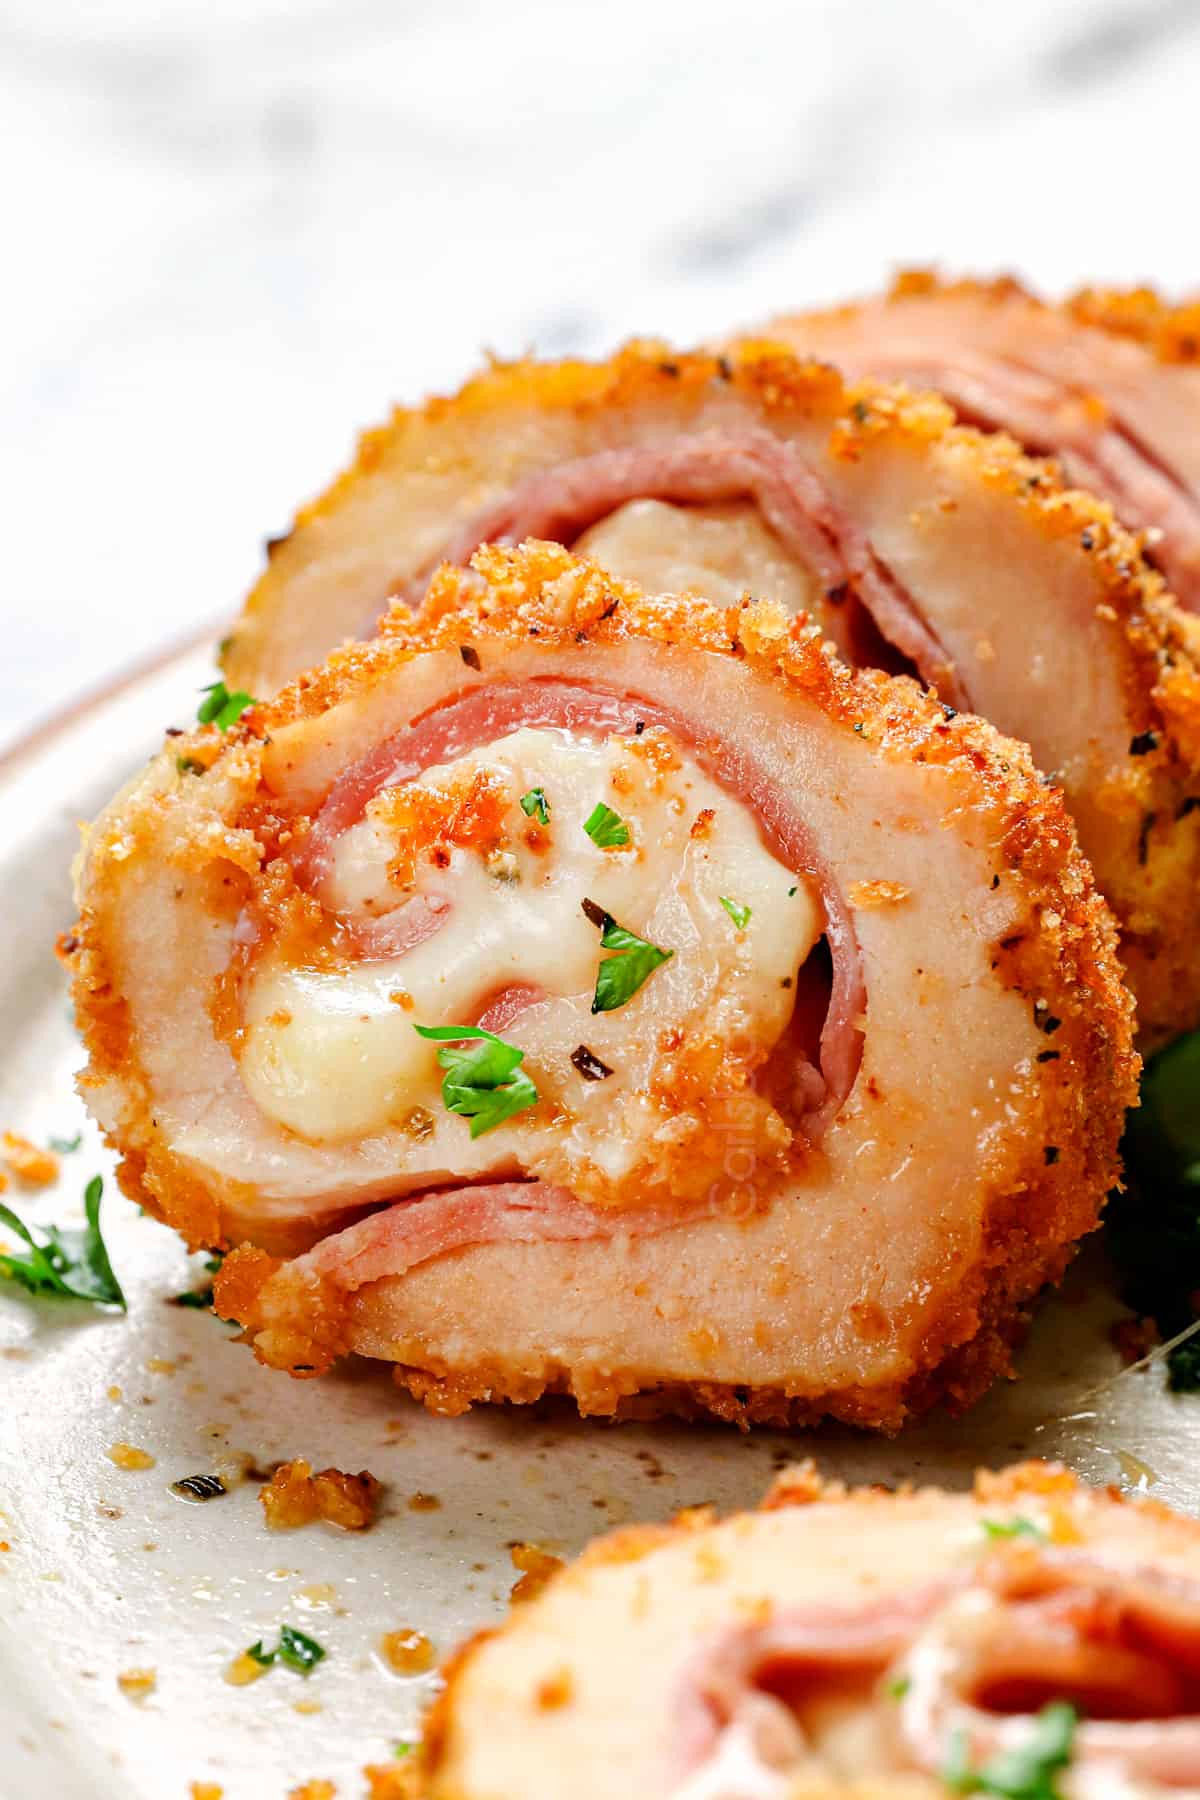 up close of a cordon bleu chicken made with Swiss cheese and ham